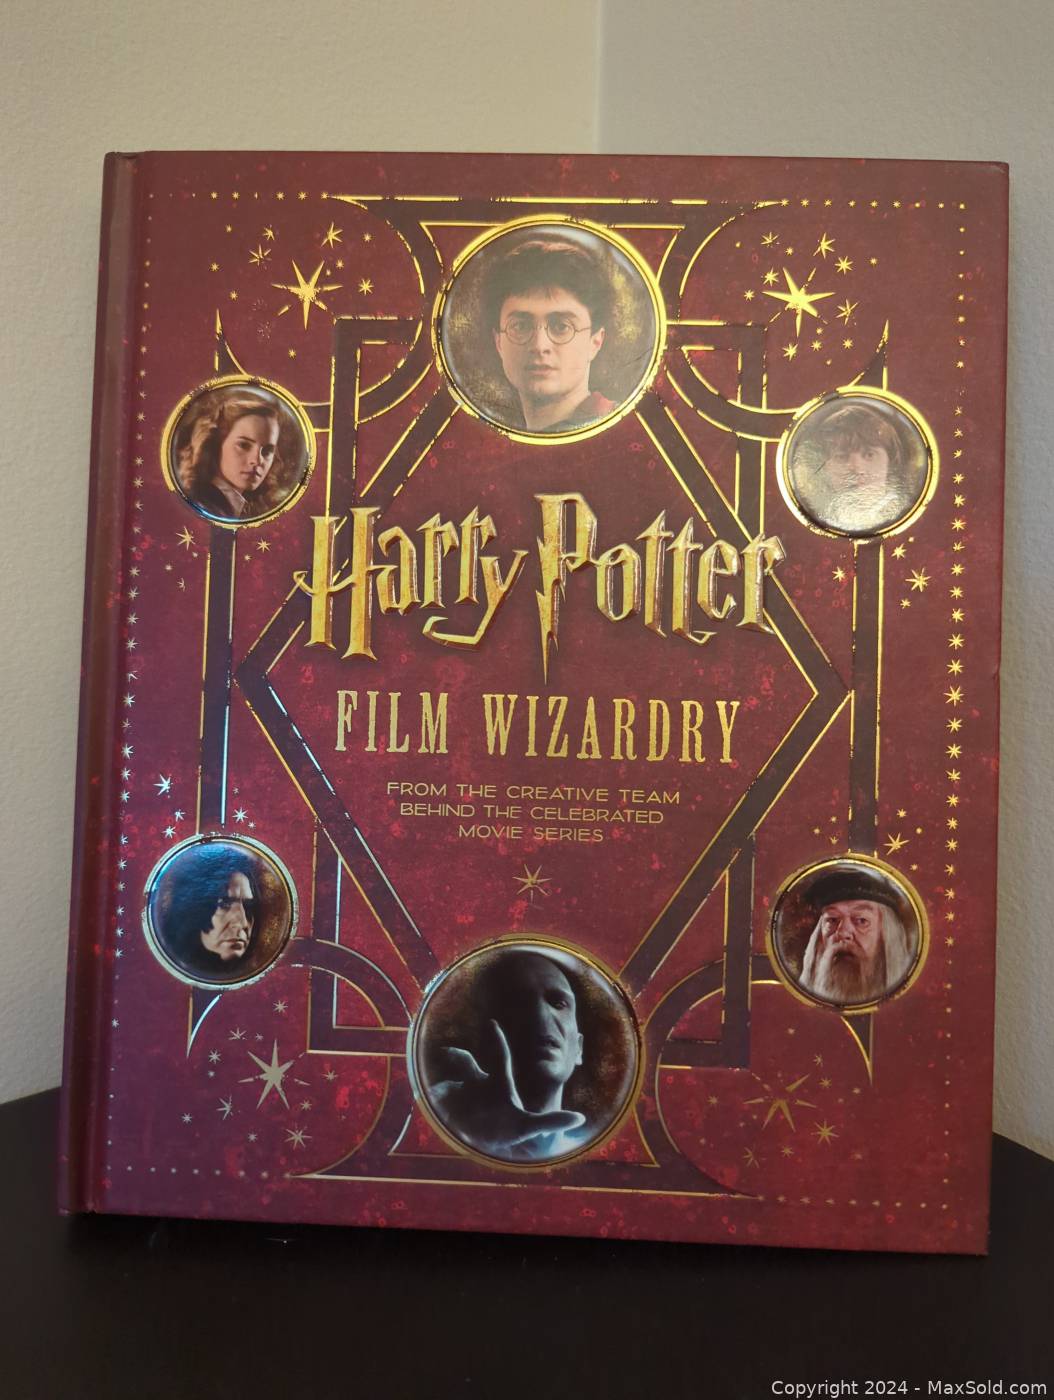 Harry Potter Film Wizardry: From the Creative Team Behind the Celebrated  Movie Series